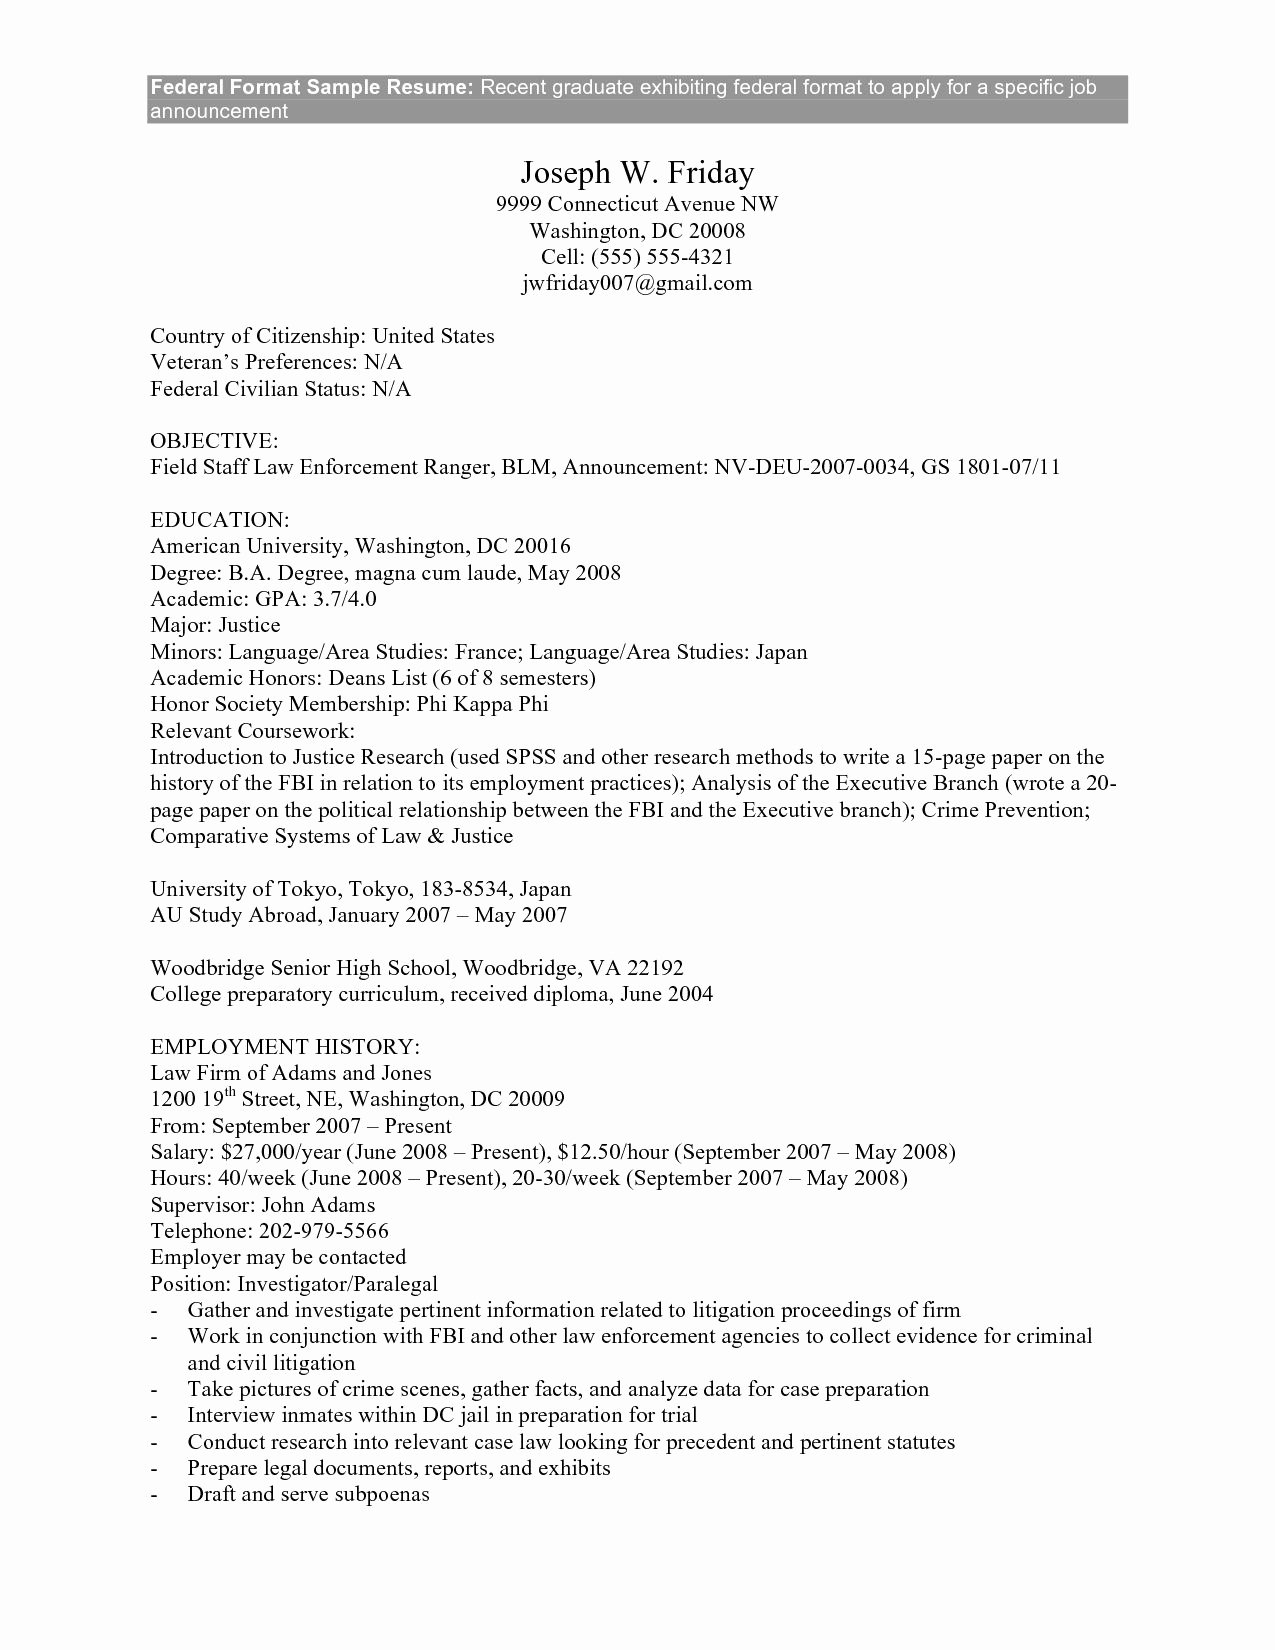 Sample Resume for Federal Jobs Luxury Federal Government Resume Example Federal Government